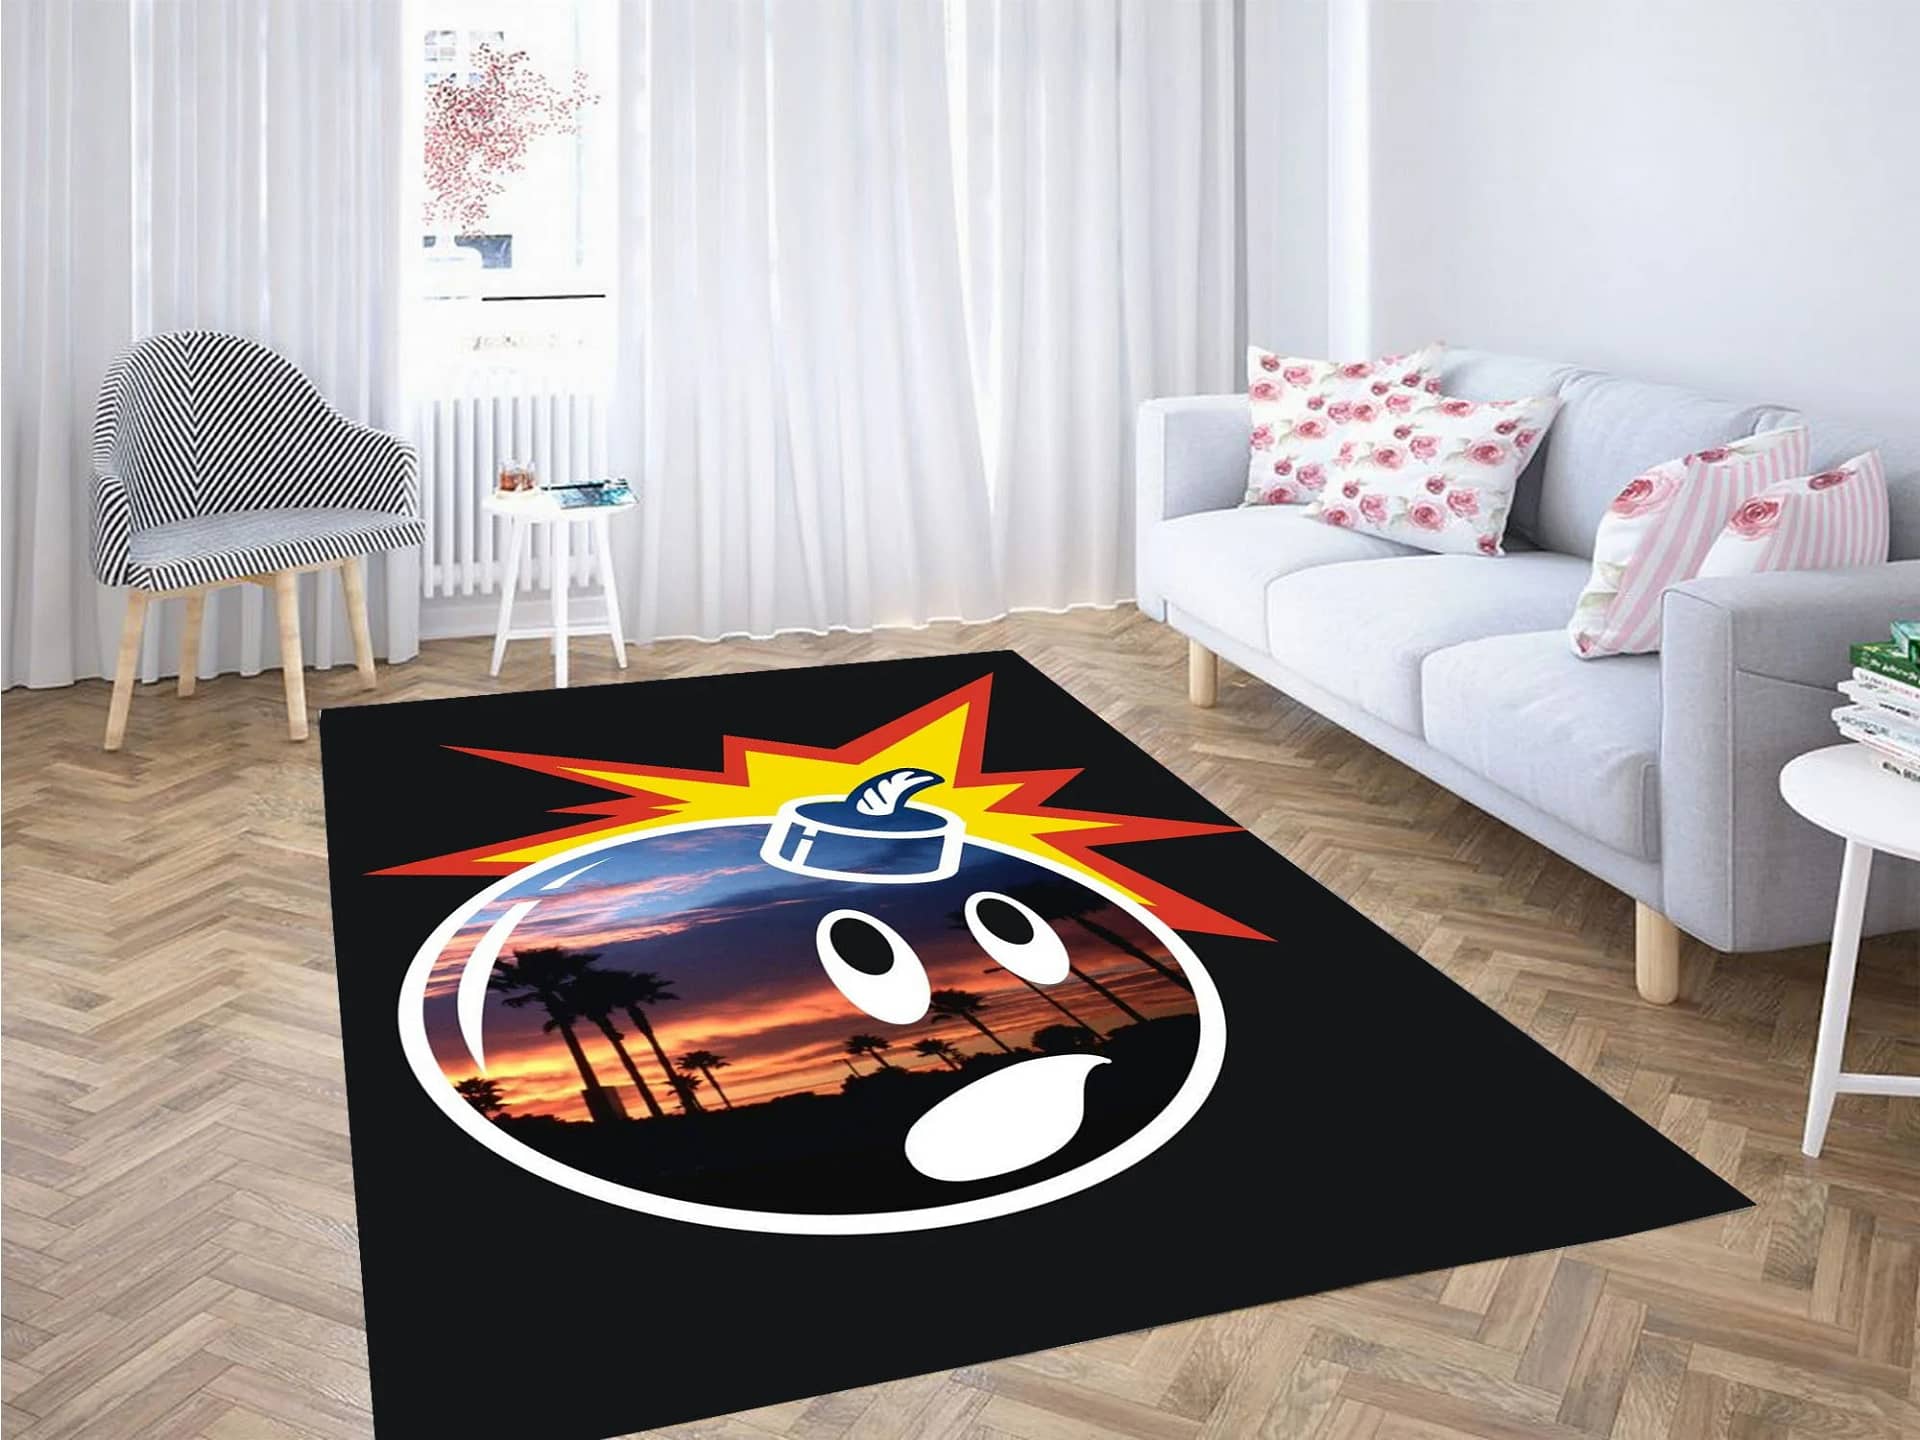 Bomb The Hundreds With Sunset Carpet Rug